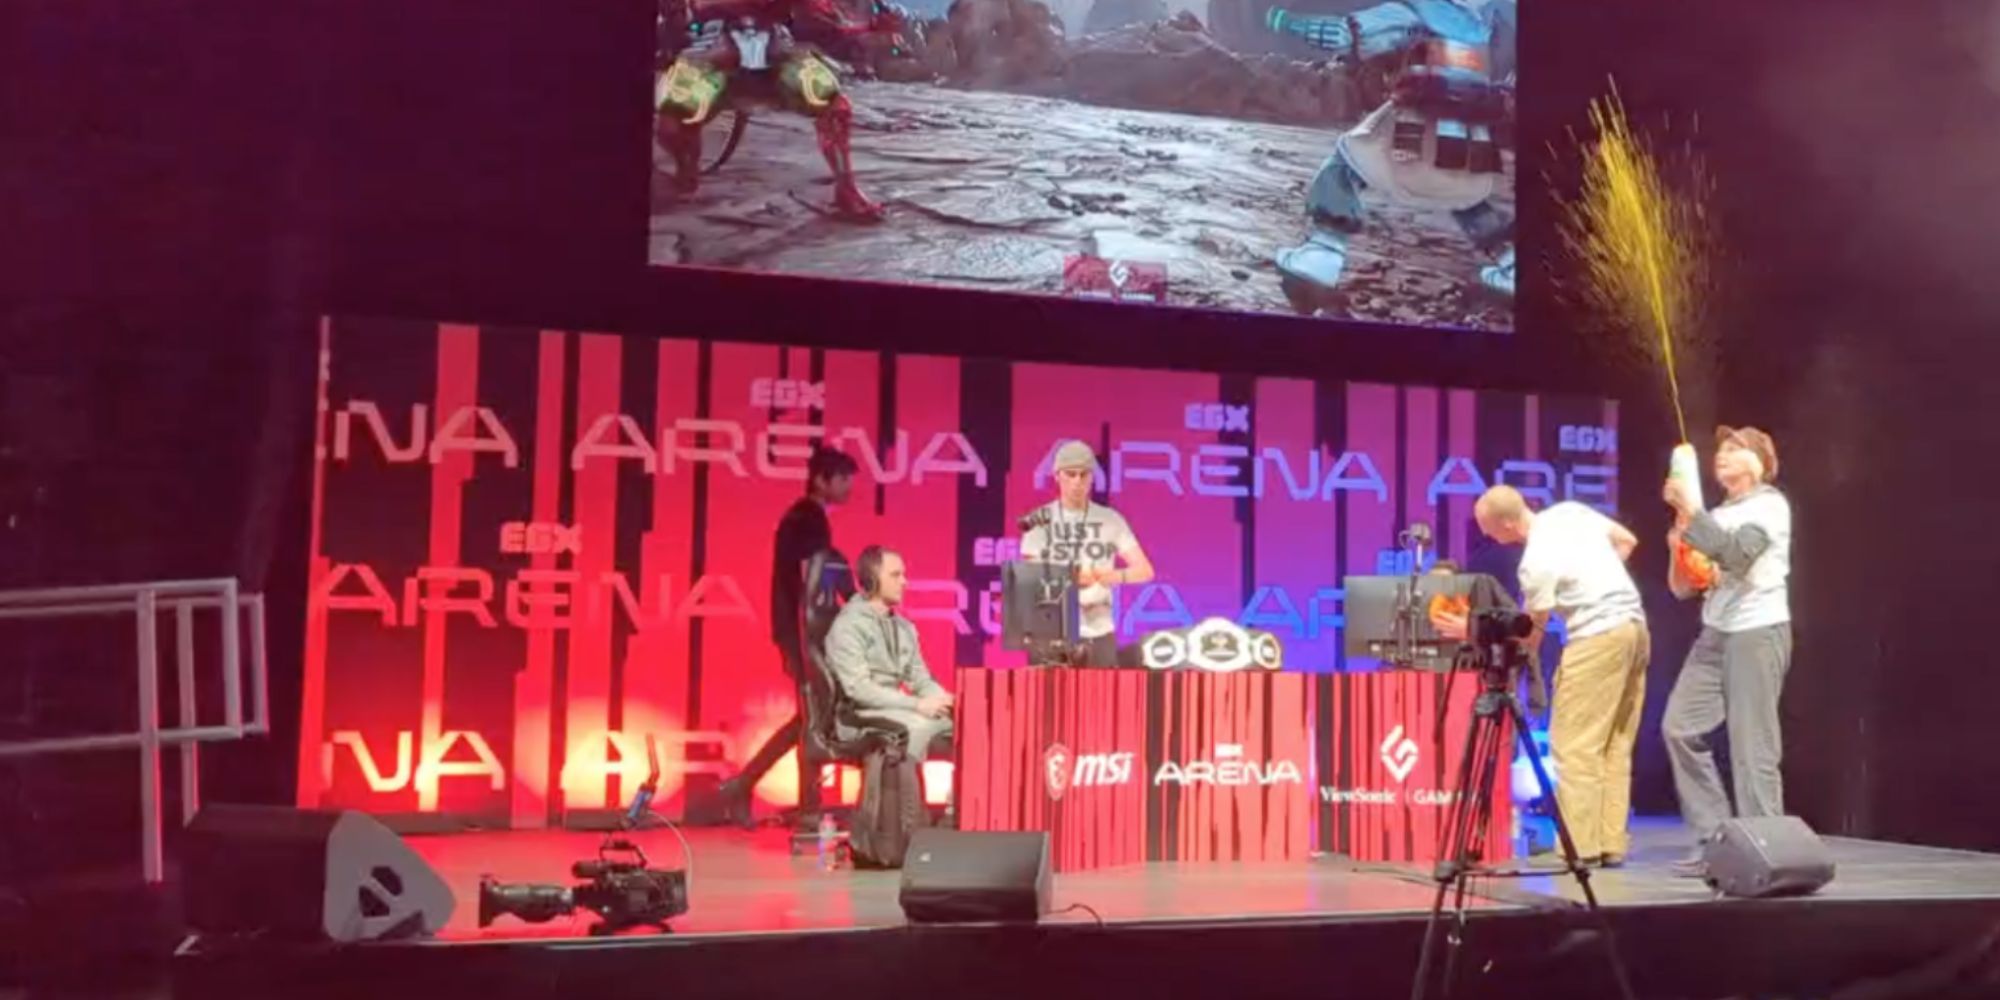 Members of Just Stop Oil protest EGX by walking on stage during a Tekken 7 tournament. Two members smear paint of computer monitors, while another fires paint from a water gun